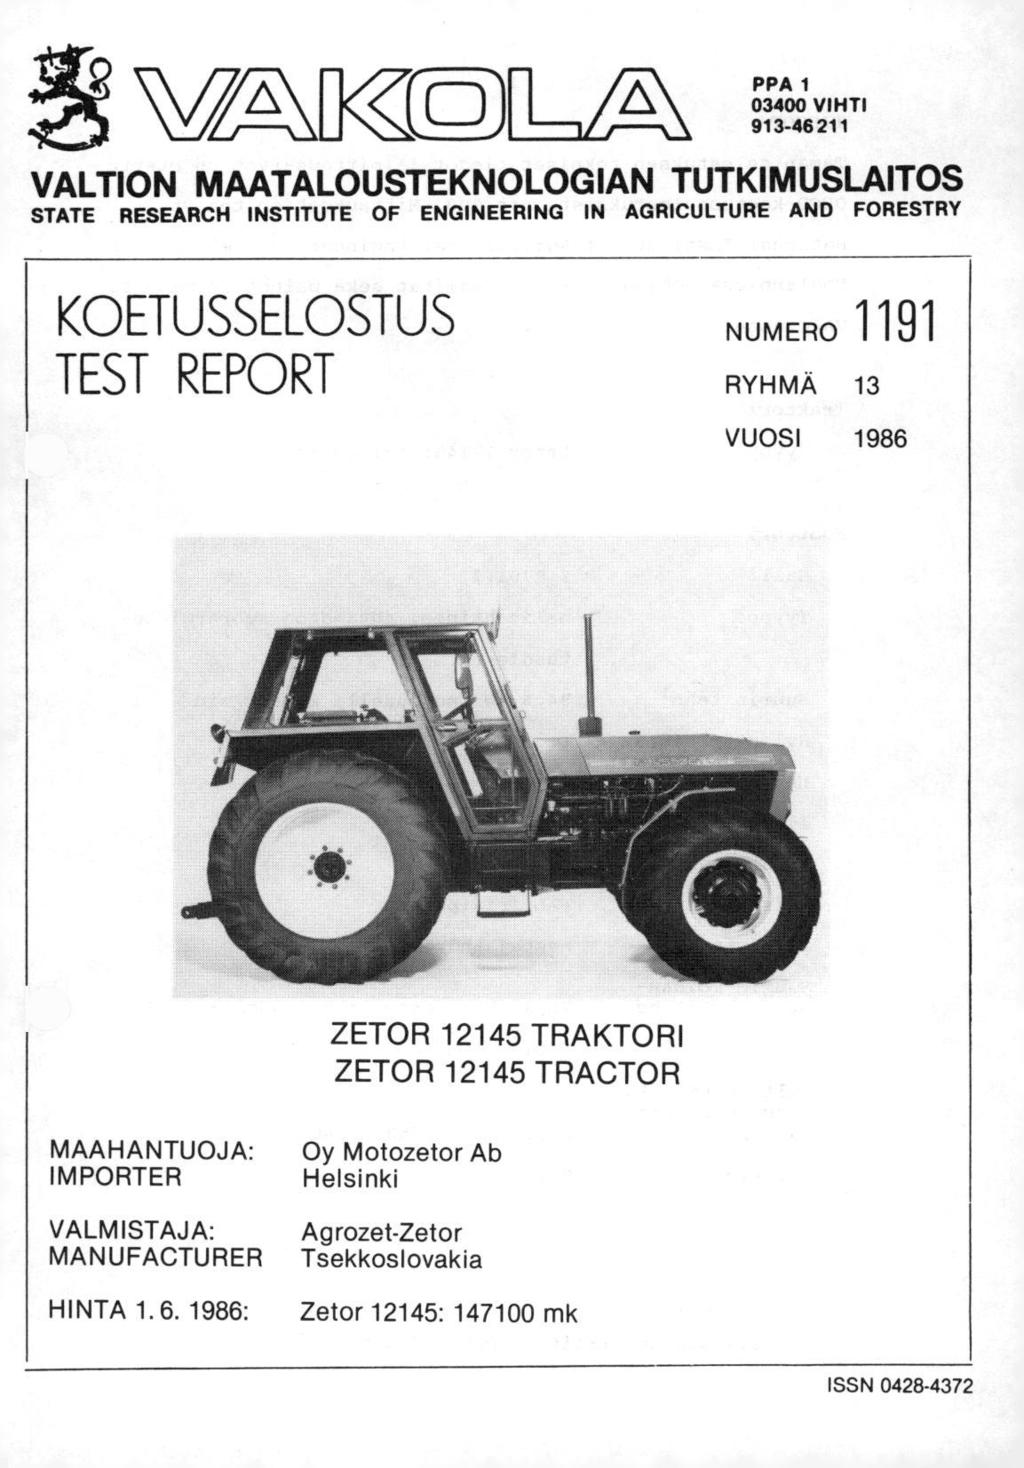 V/A-\ME)) PPA 34 VIHTI 93-462 VALTION MAATALOUSTEKNOLOGIAN TUTKIMUSLAITOS STATE RESEARCH INSTITUTE OF ENGINEERING IN AGRICULTURE AND FORESTRY KOETUSSELOSTUS TEST REPORT NUMERO 9 RYHMÄ 3